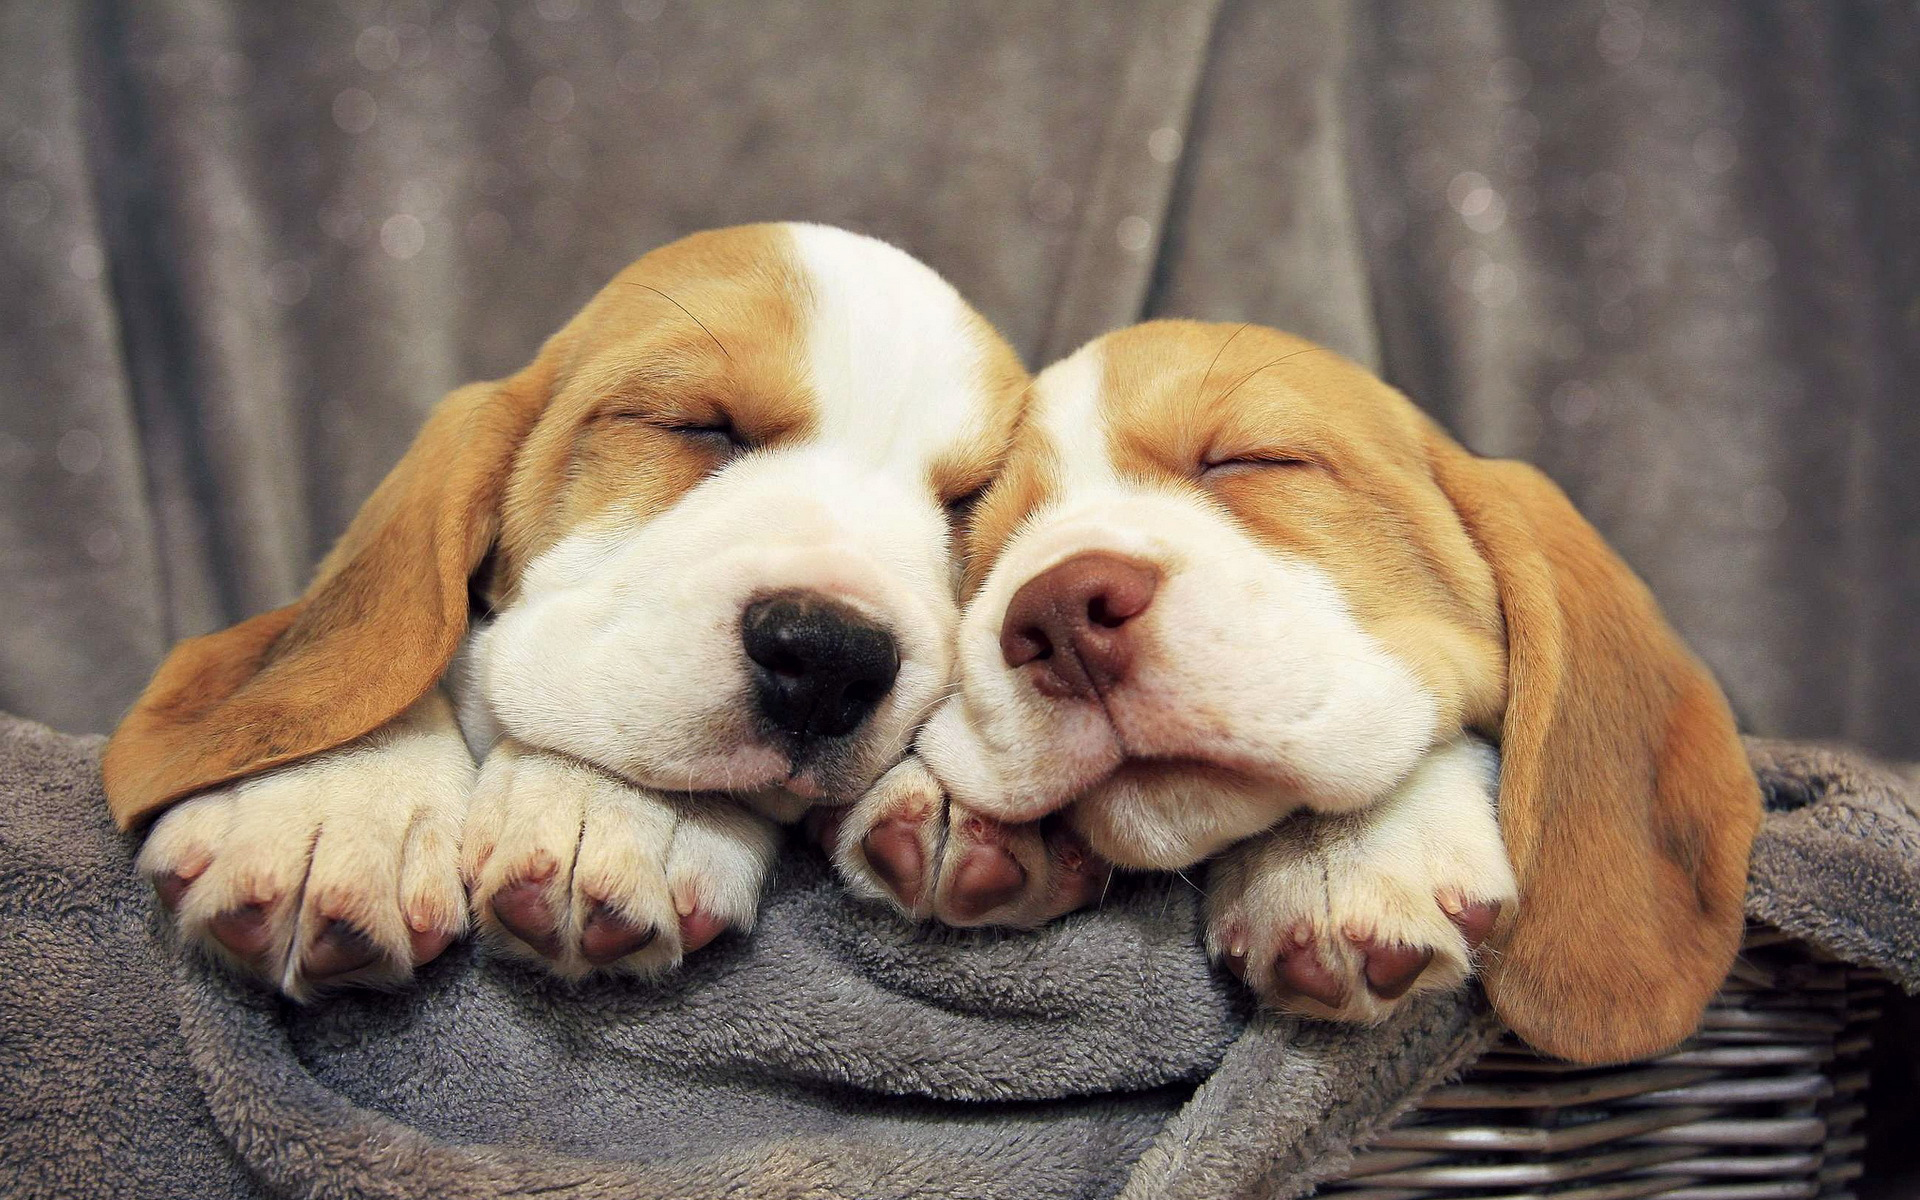 Basset hound puppies sweetly sleeping wallpapers and 